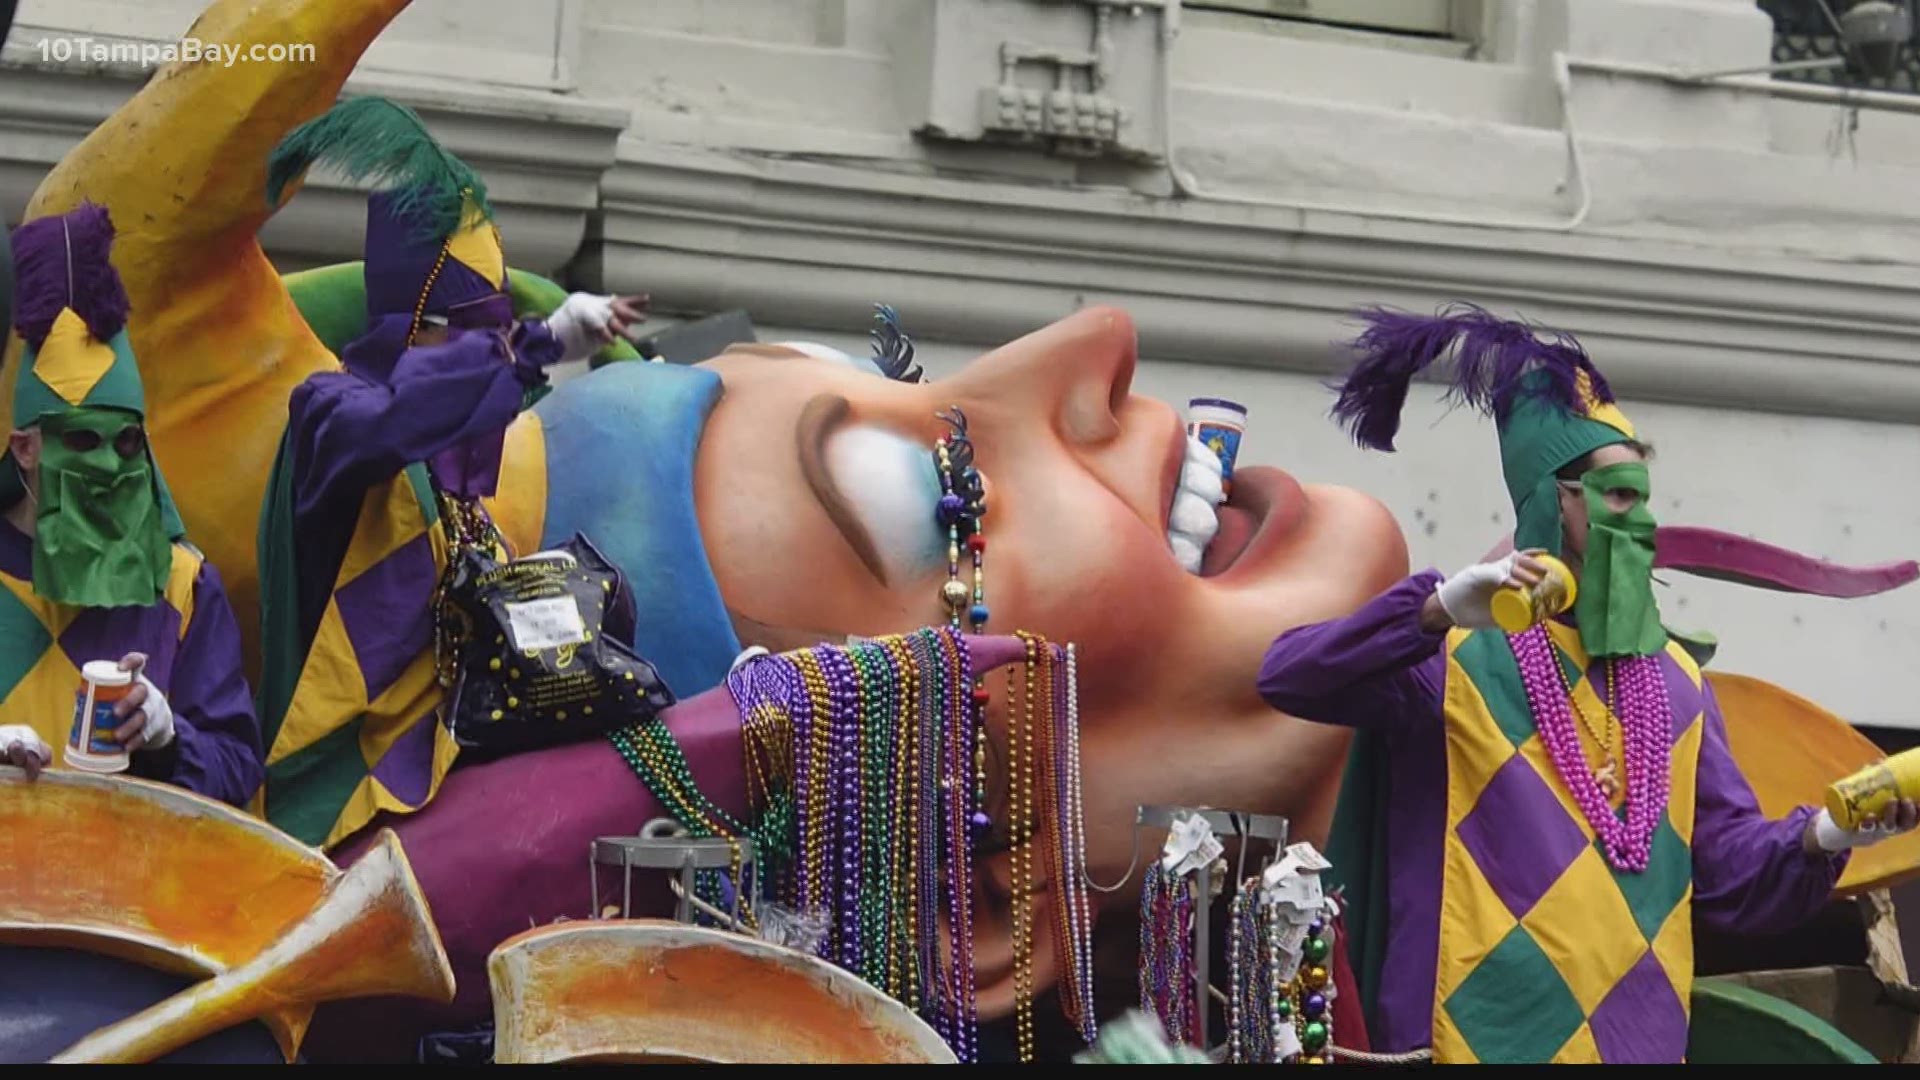 Bourbon Street in New Orleans would usually be packed, but Mardi Gras celebrations will look different this year.